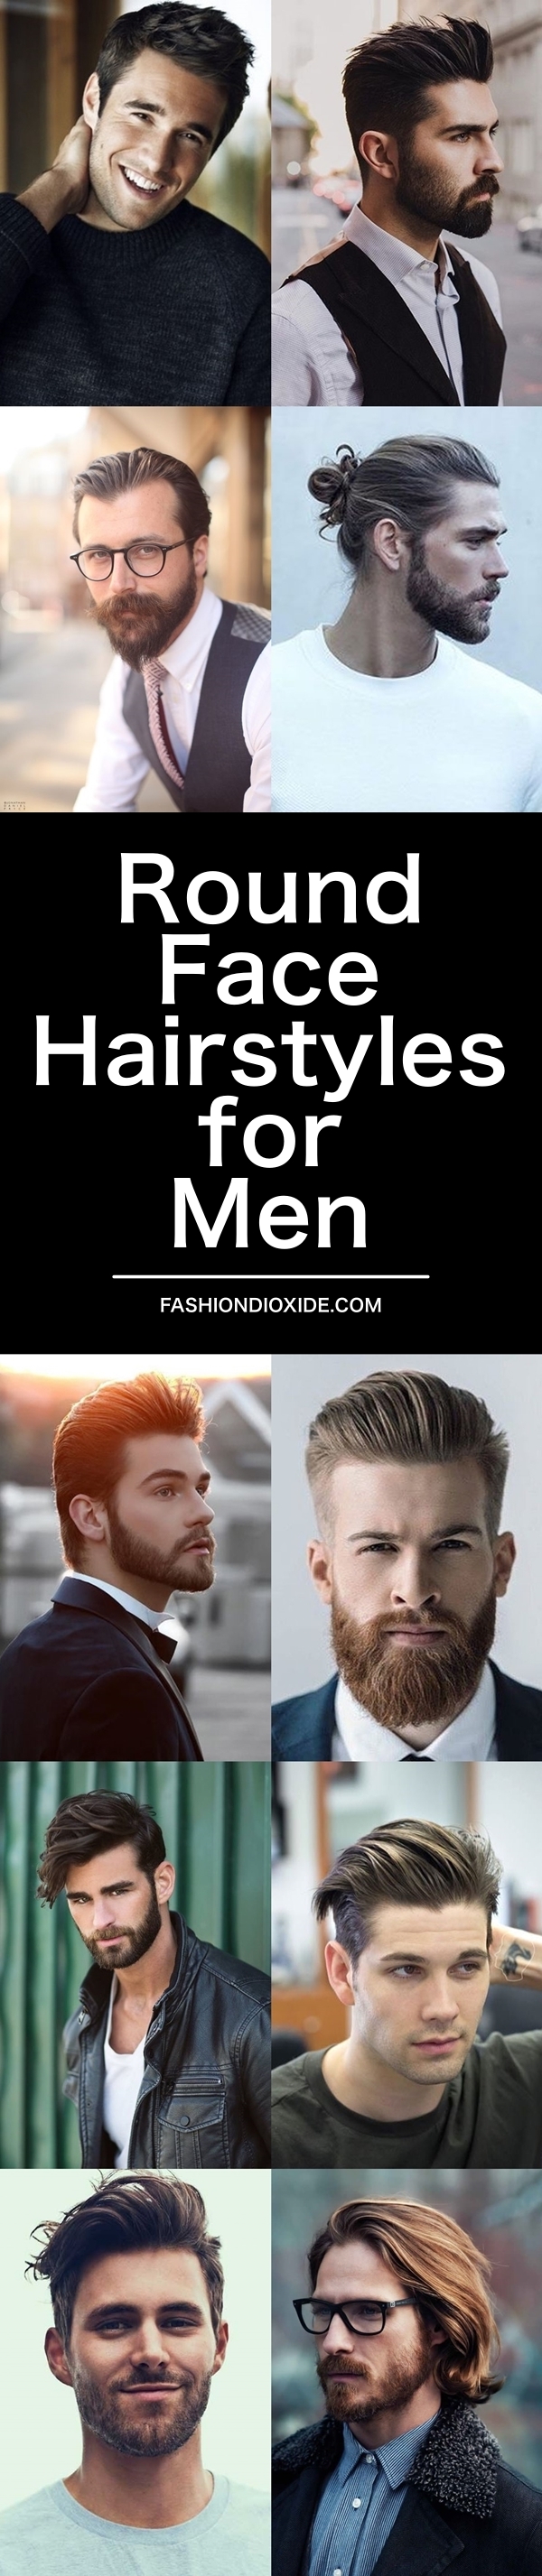 Round-Face-Hairstyles-for-Men